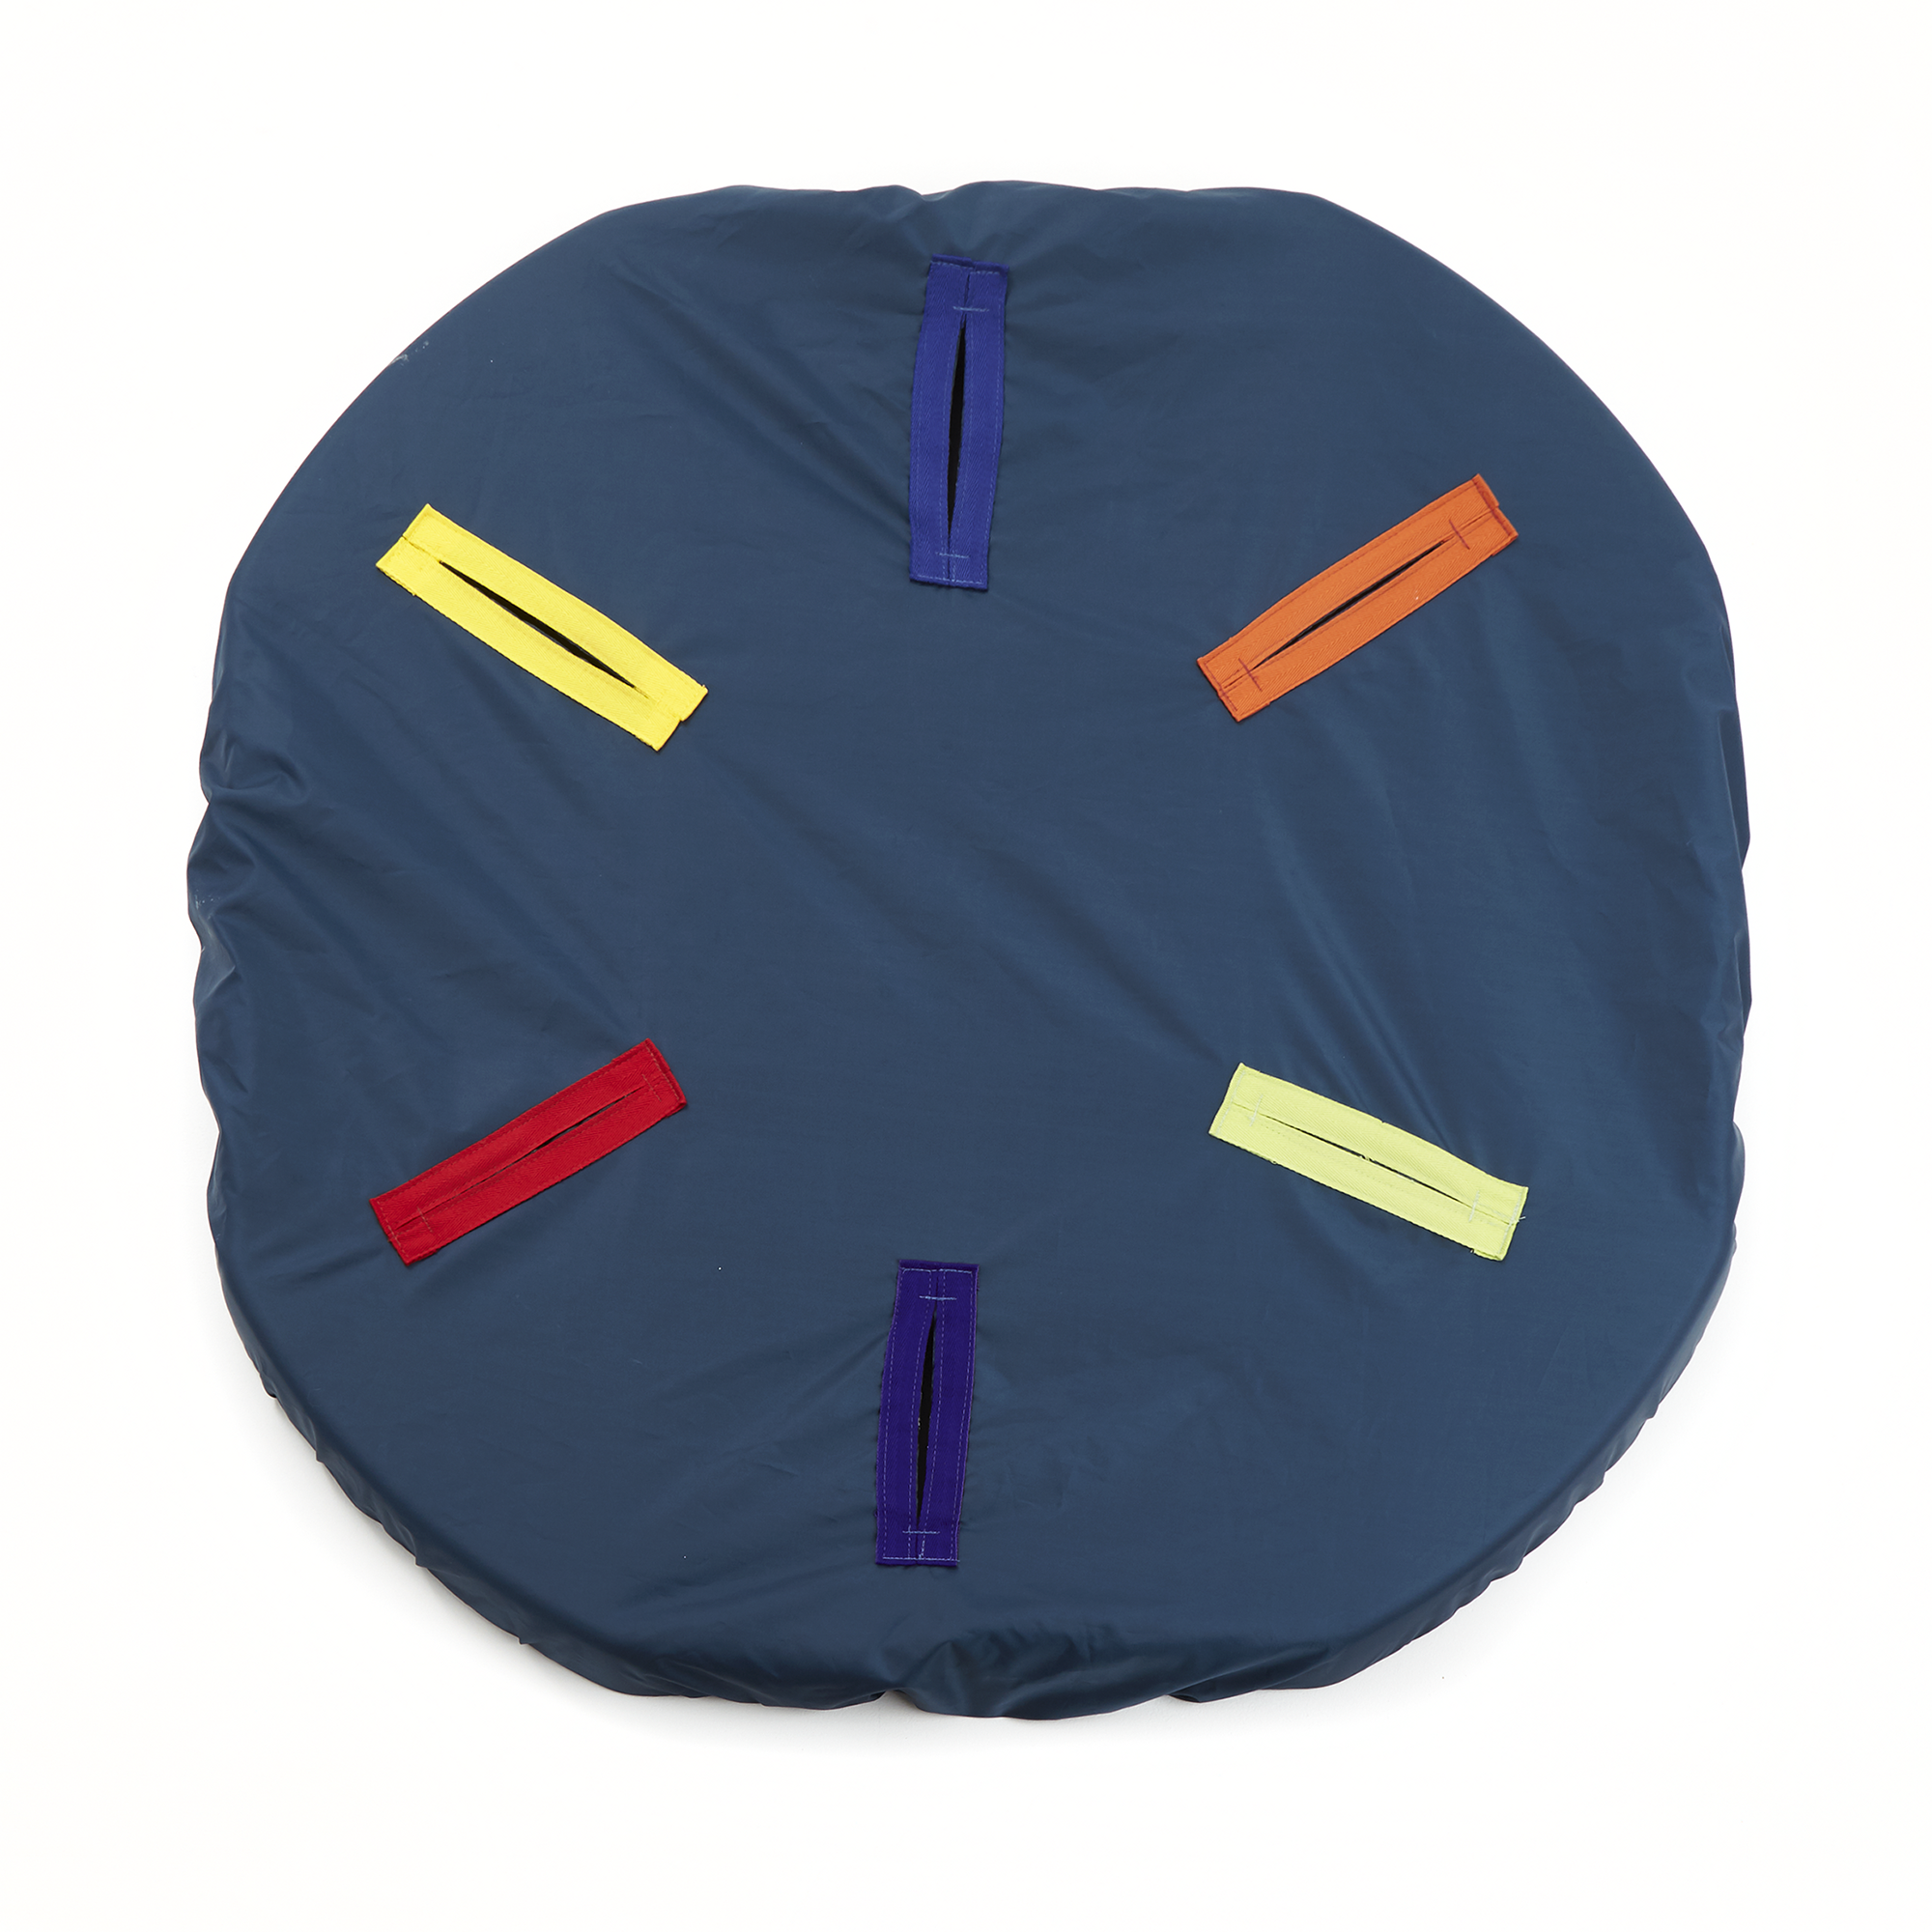 Play Tray Sensory Cover With Hand Holes